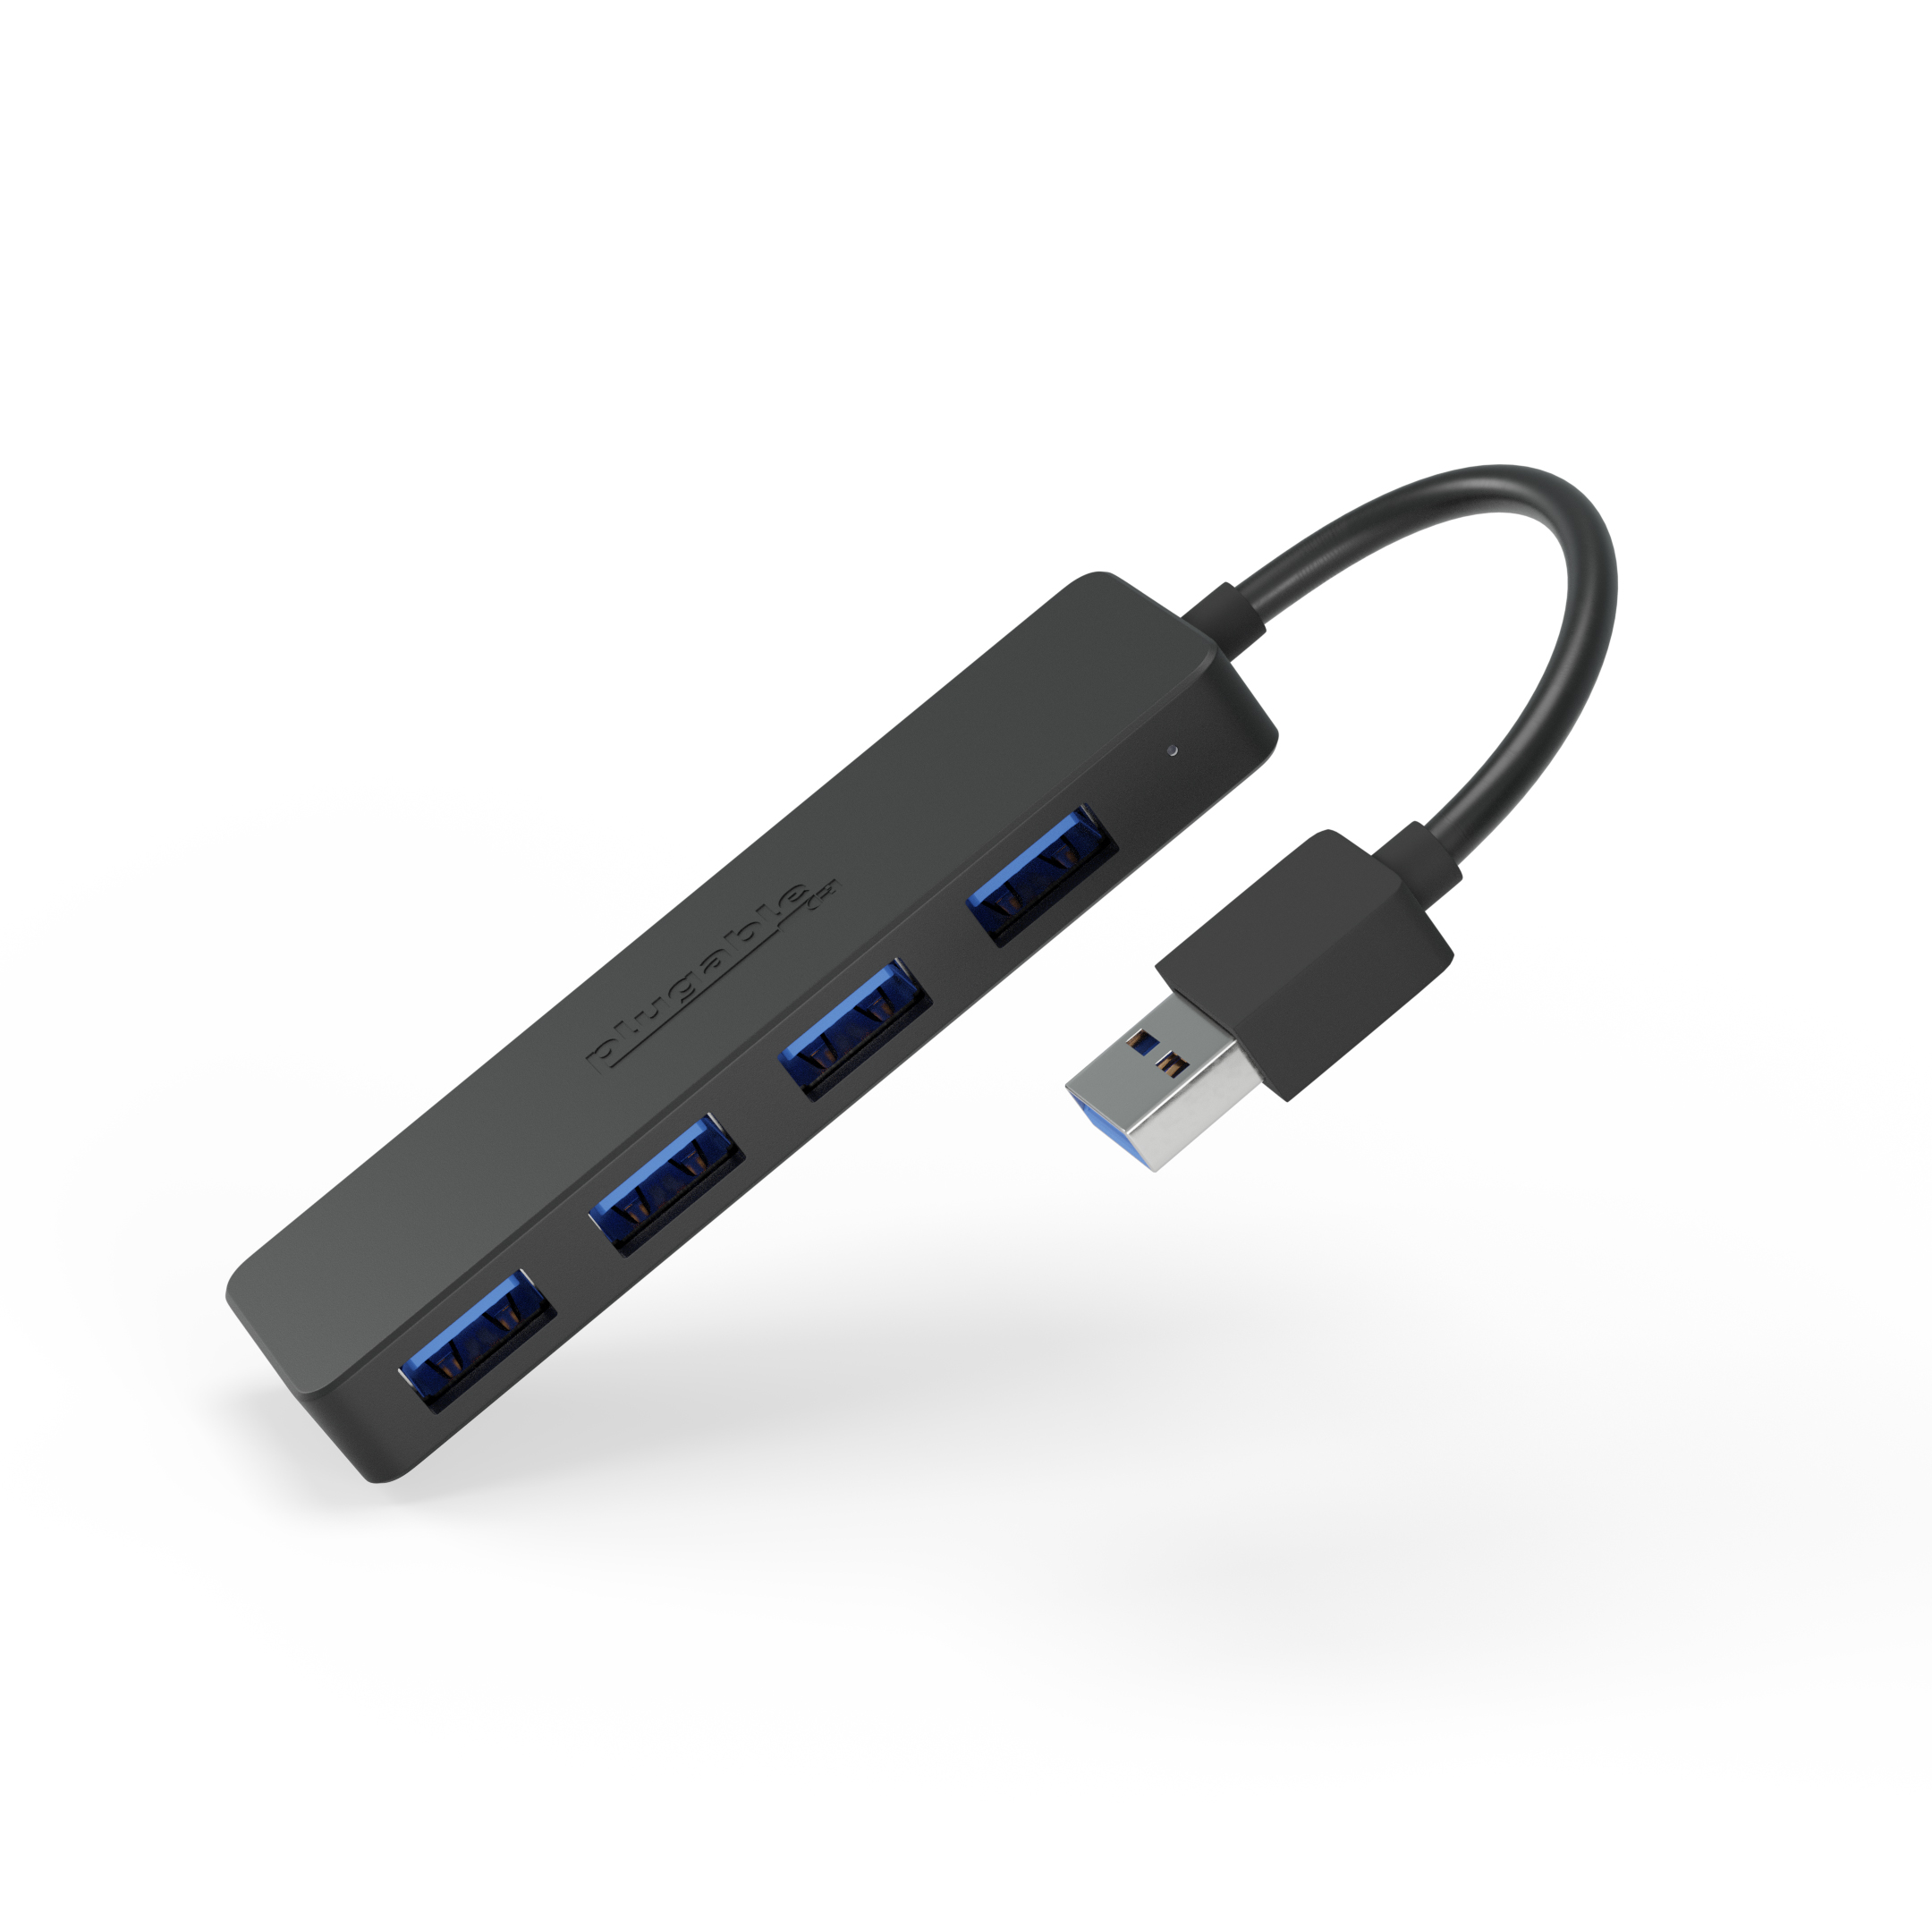 Plugable 4 Port USB Hub 3.0, USB Splitter for Laptop, Compatible with Windows, Surface Pro, PC, Chromebook, Linux, Android, Charging Not Supported - image 1 of 6